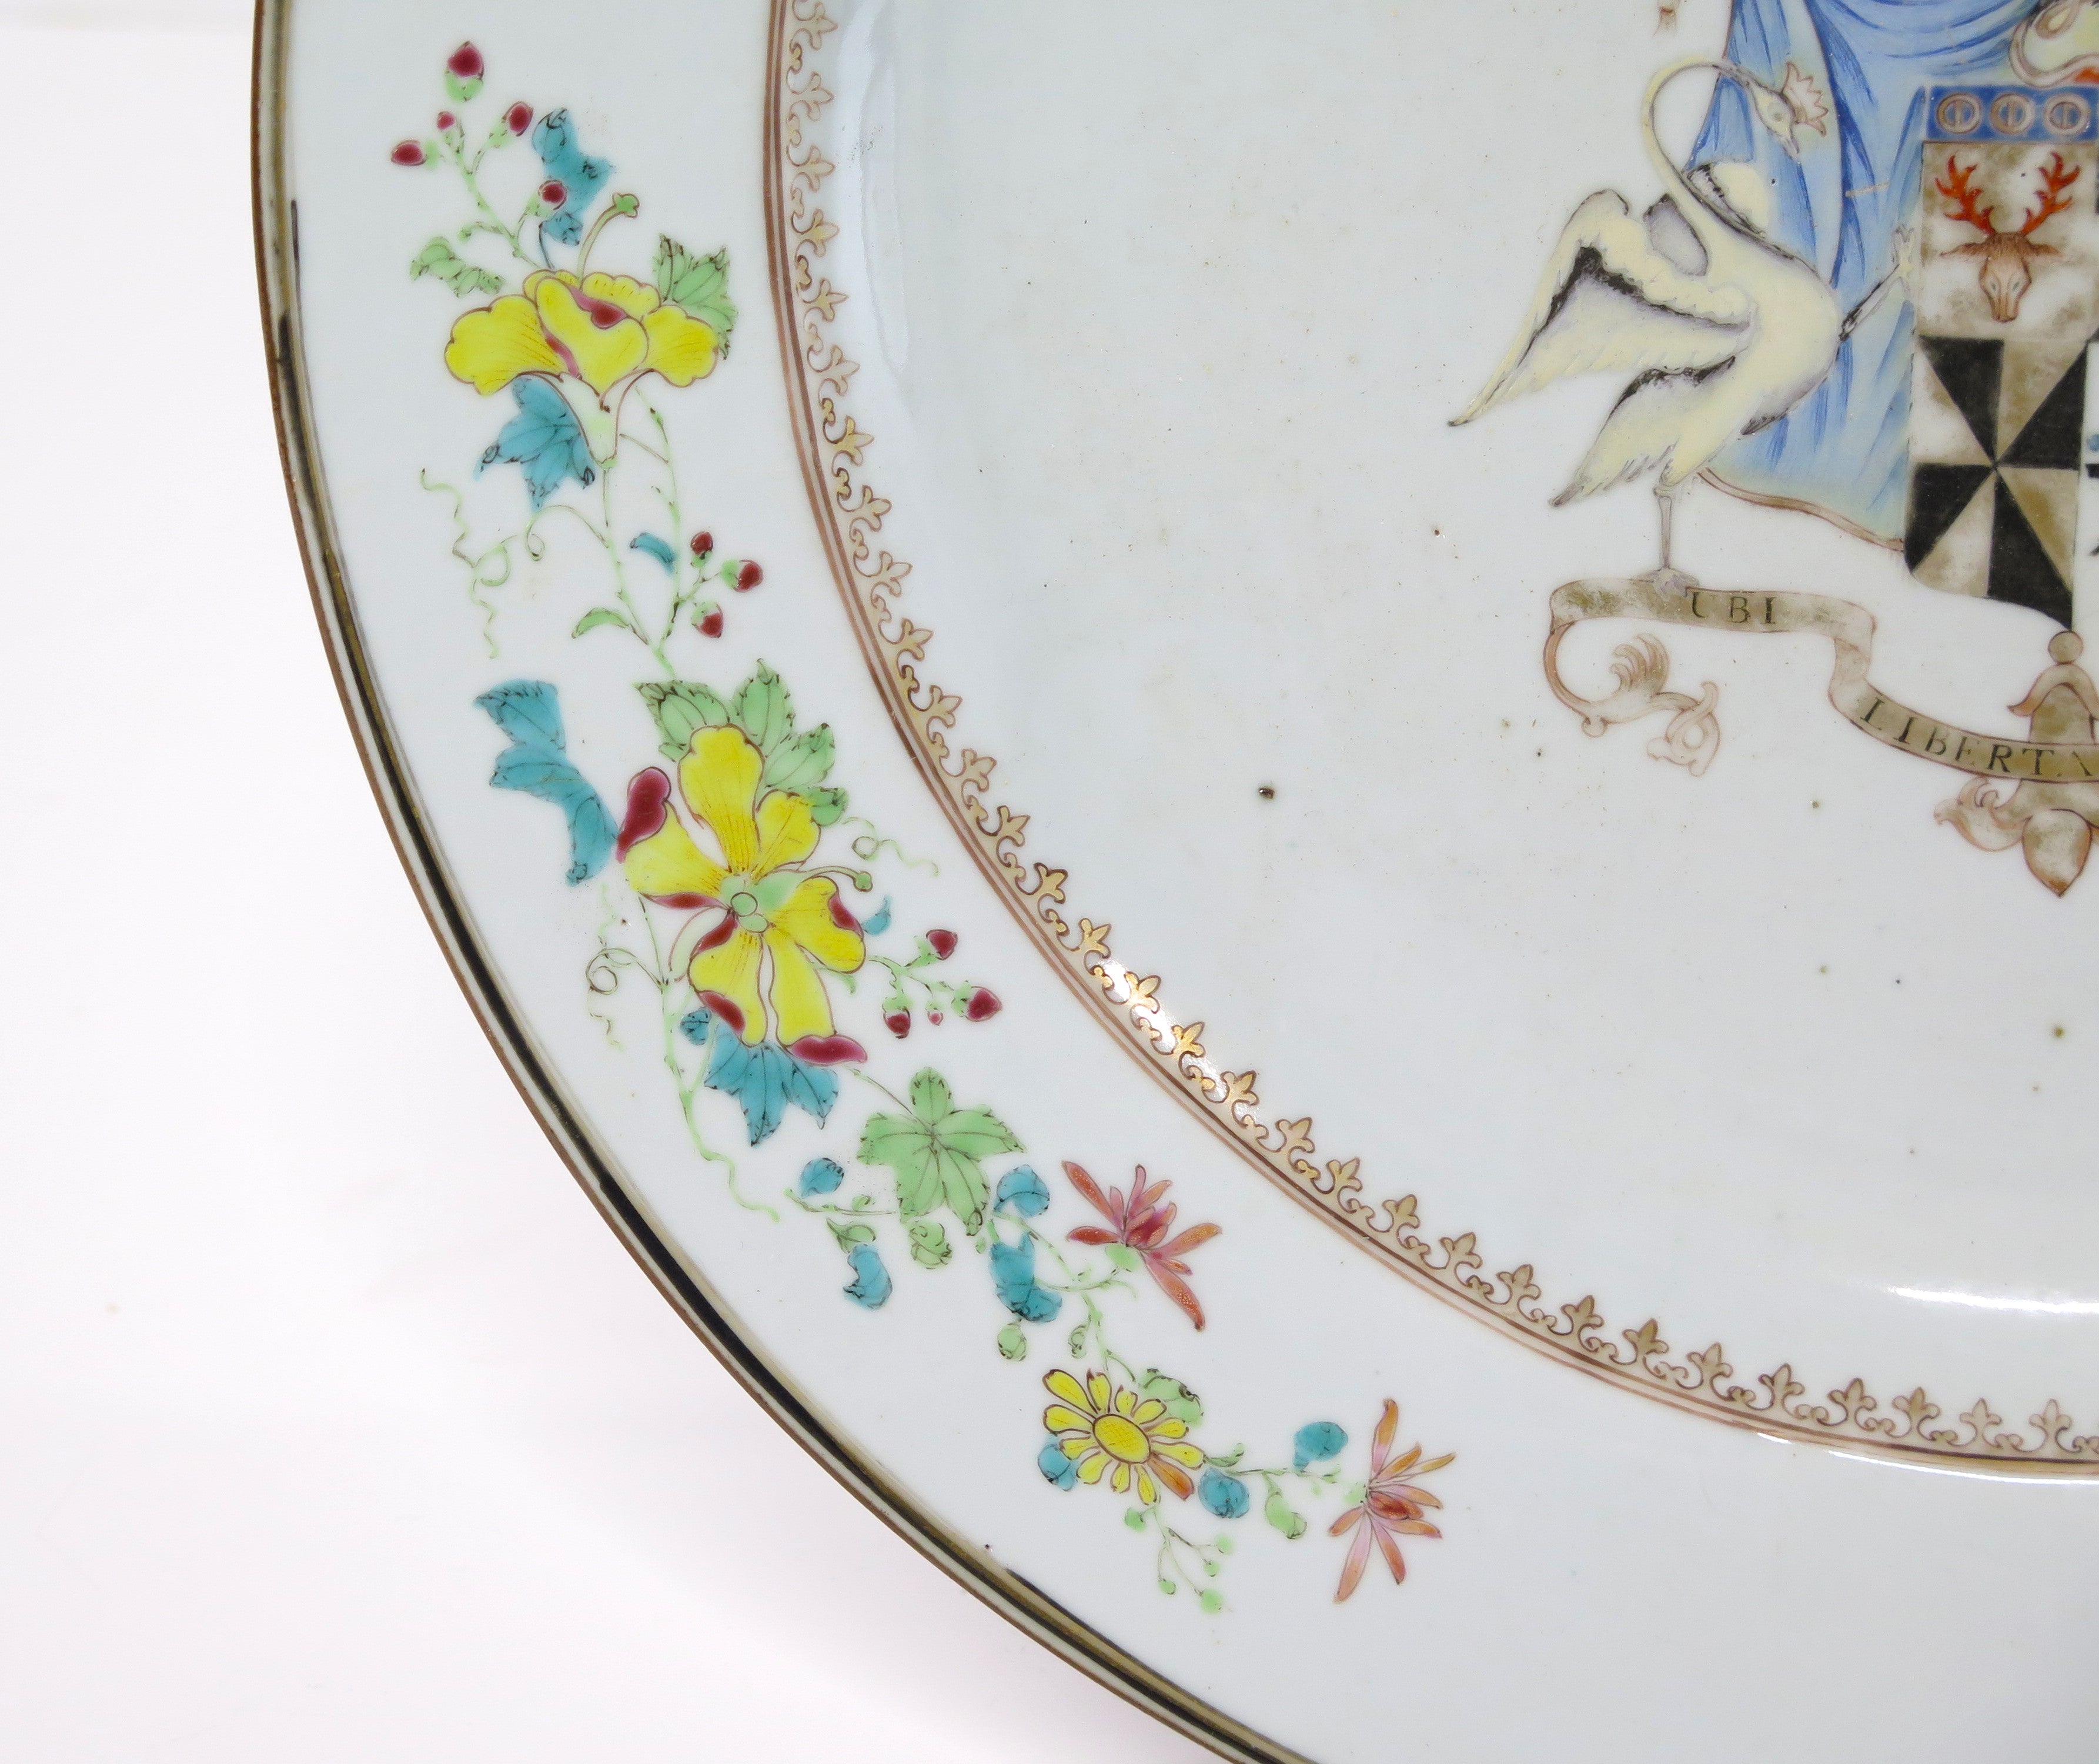 A Beautifully Enameled Chinese Porcelain Emorial Charger